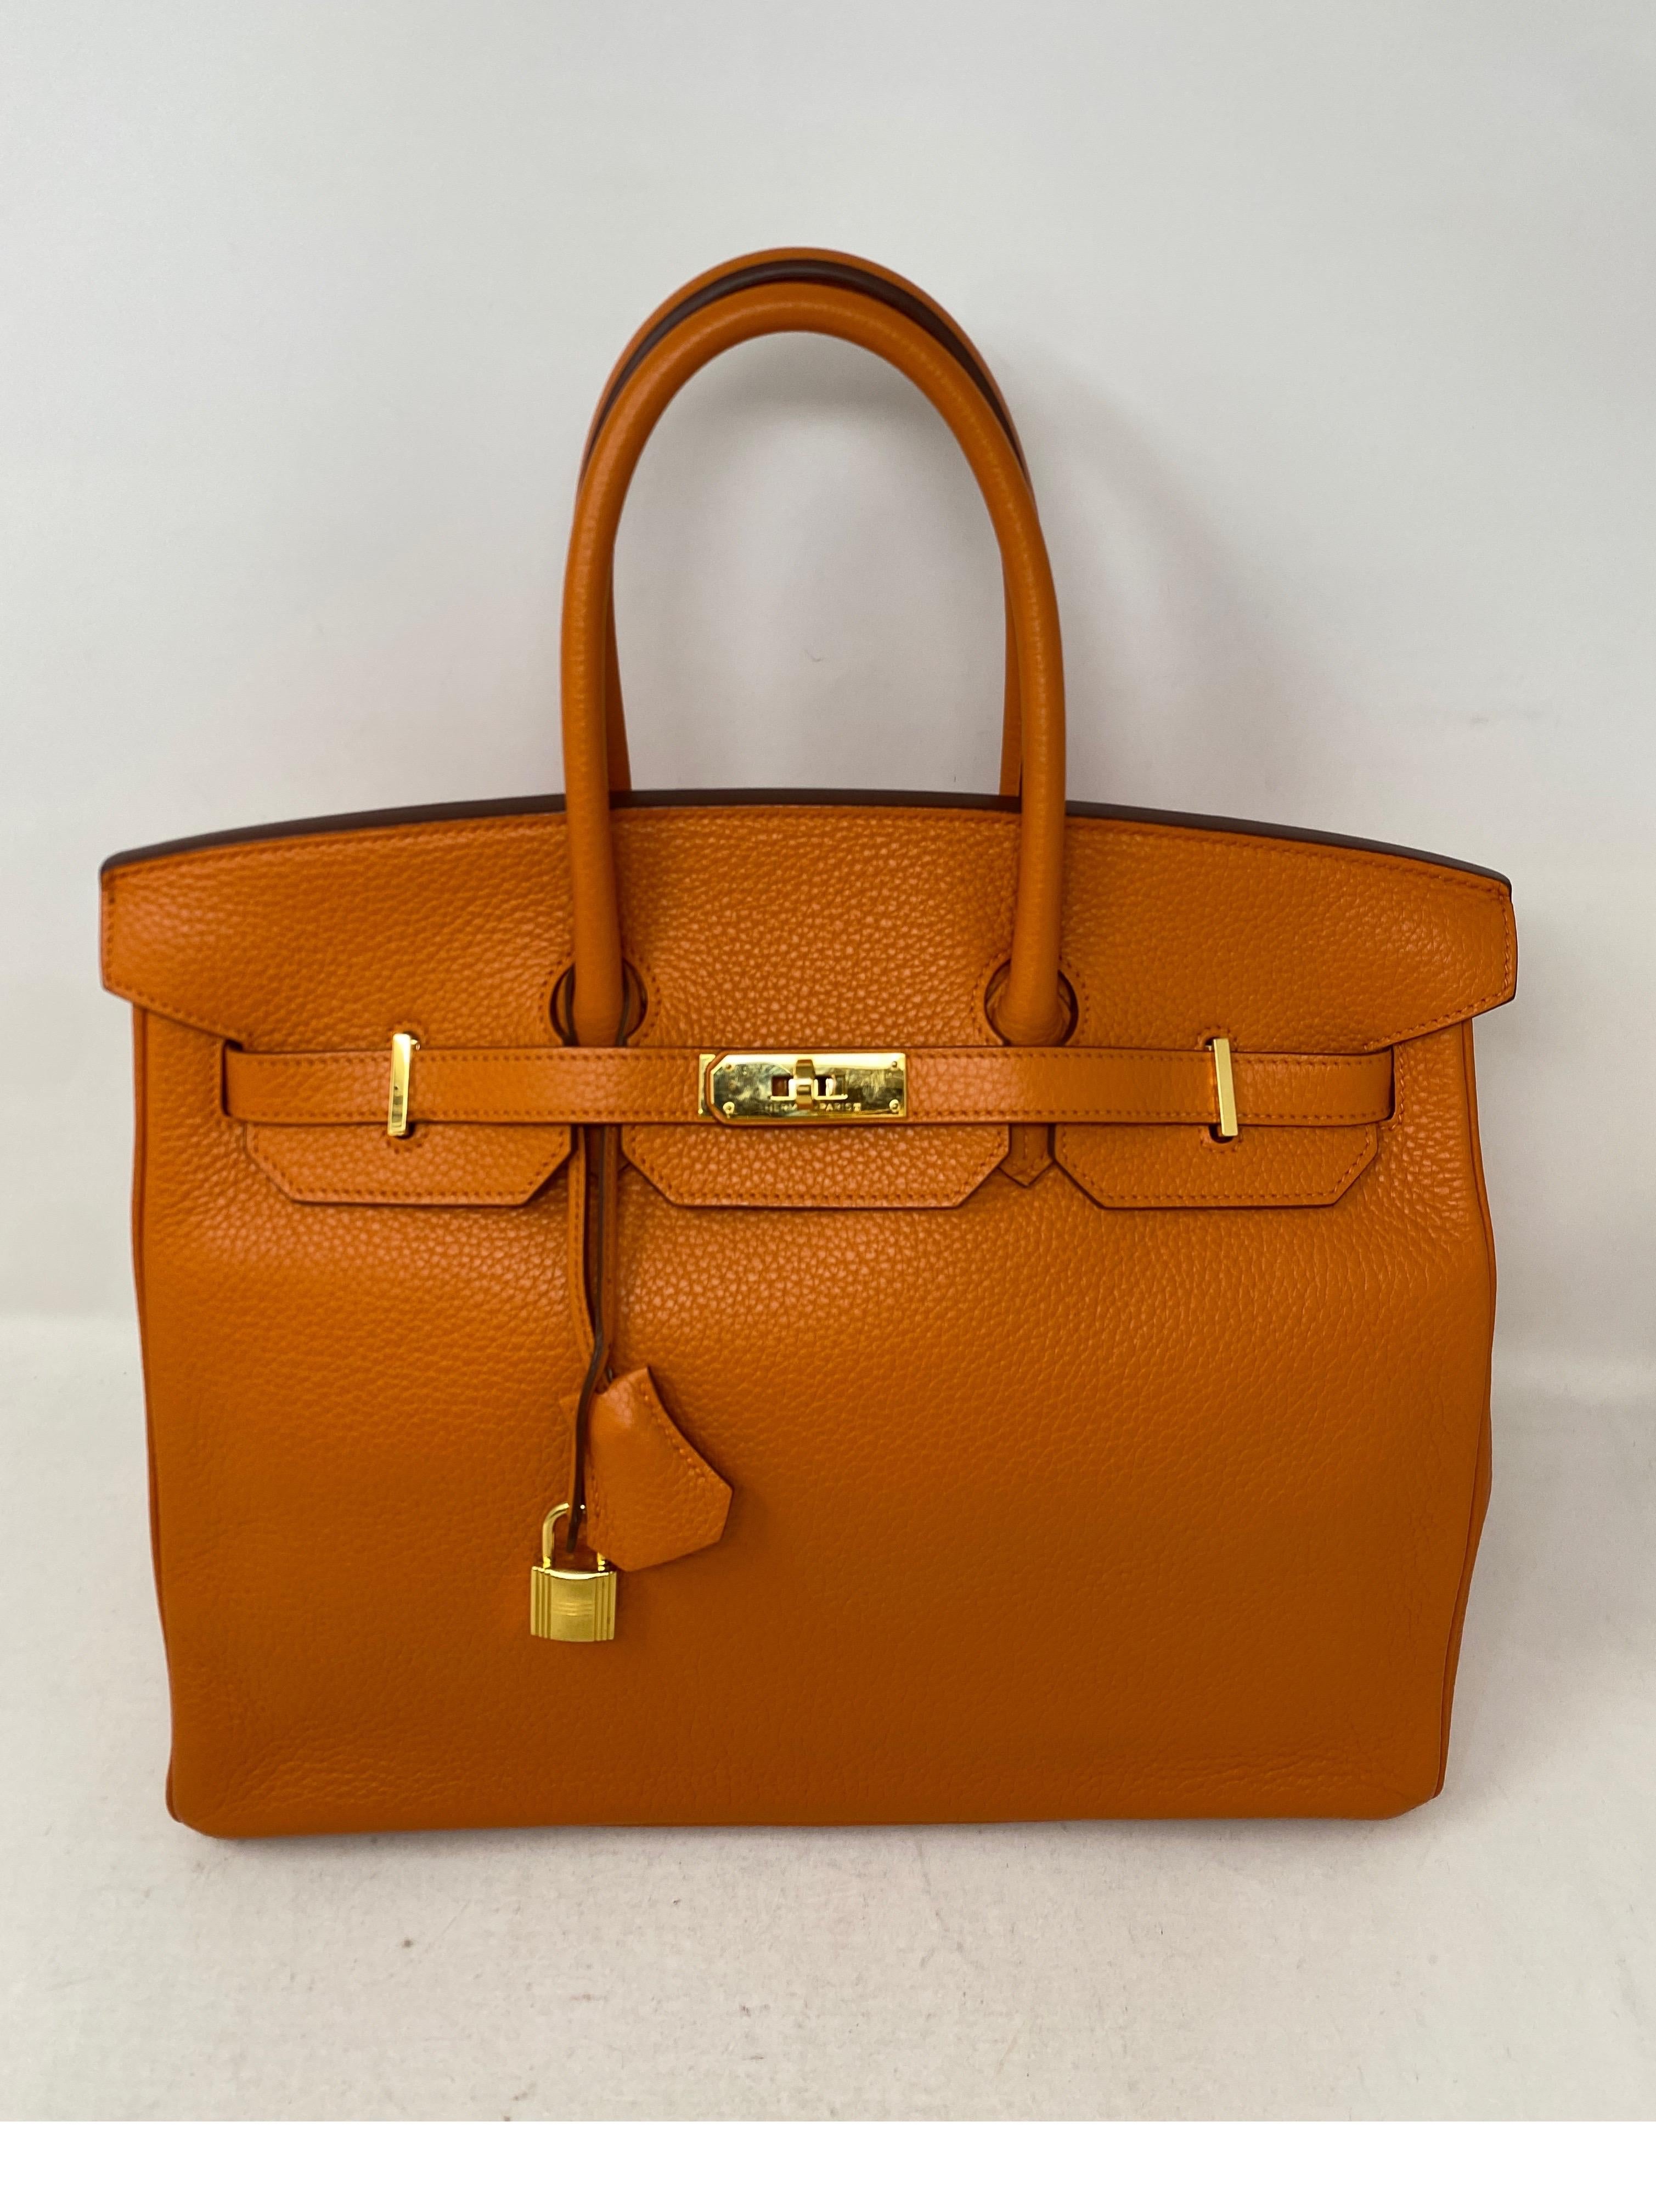 Hermes Orange Birkin 35 Bag. Clemence leather. Gold hardware. Classic Hermes Orange. Good condition. T square stamp. Includes clochette, lock, keys, and dust bag. Add to your collection. Guaranteed authentic. 